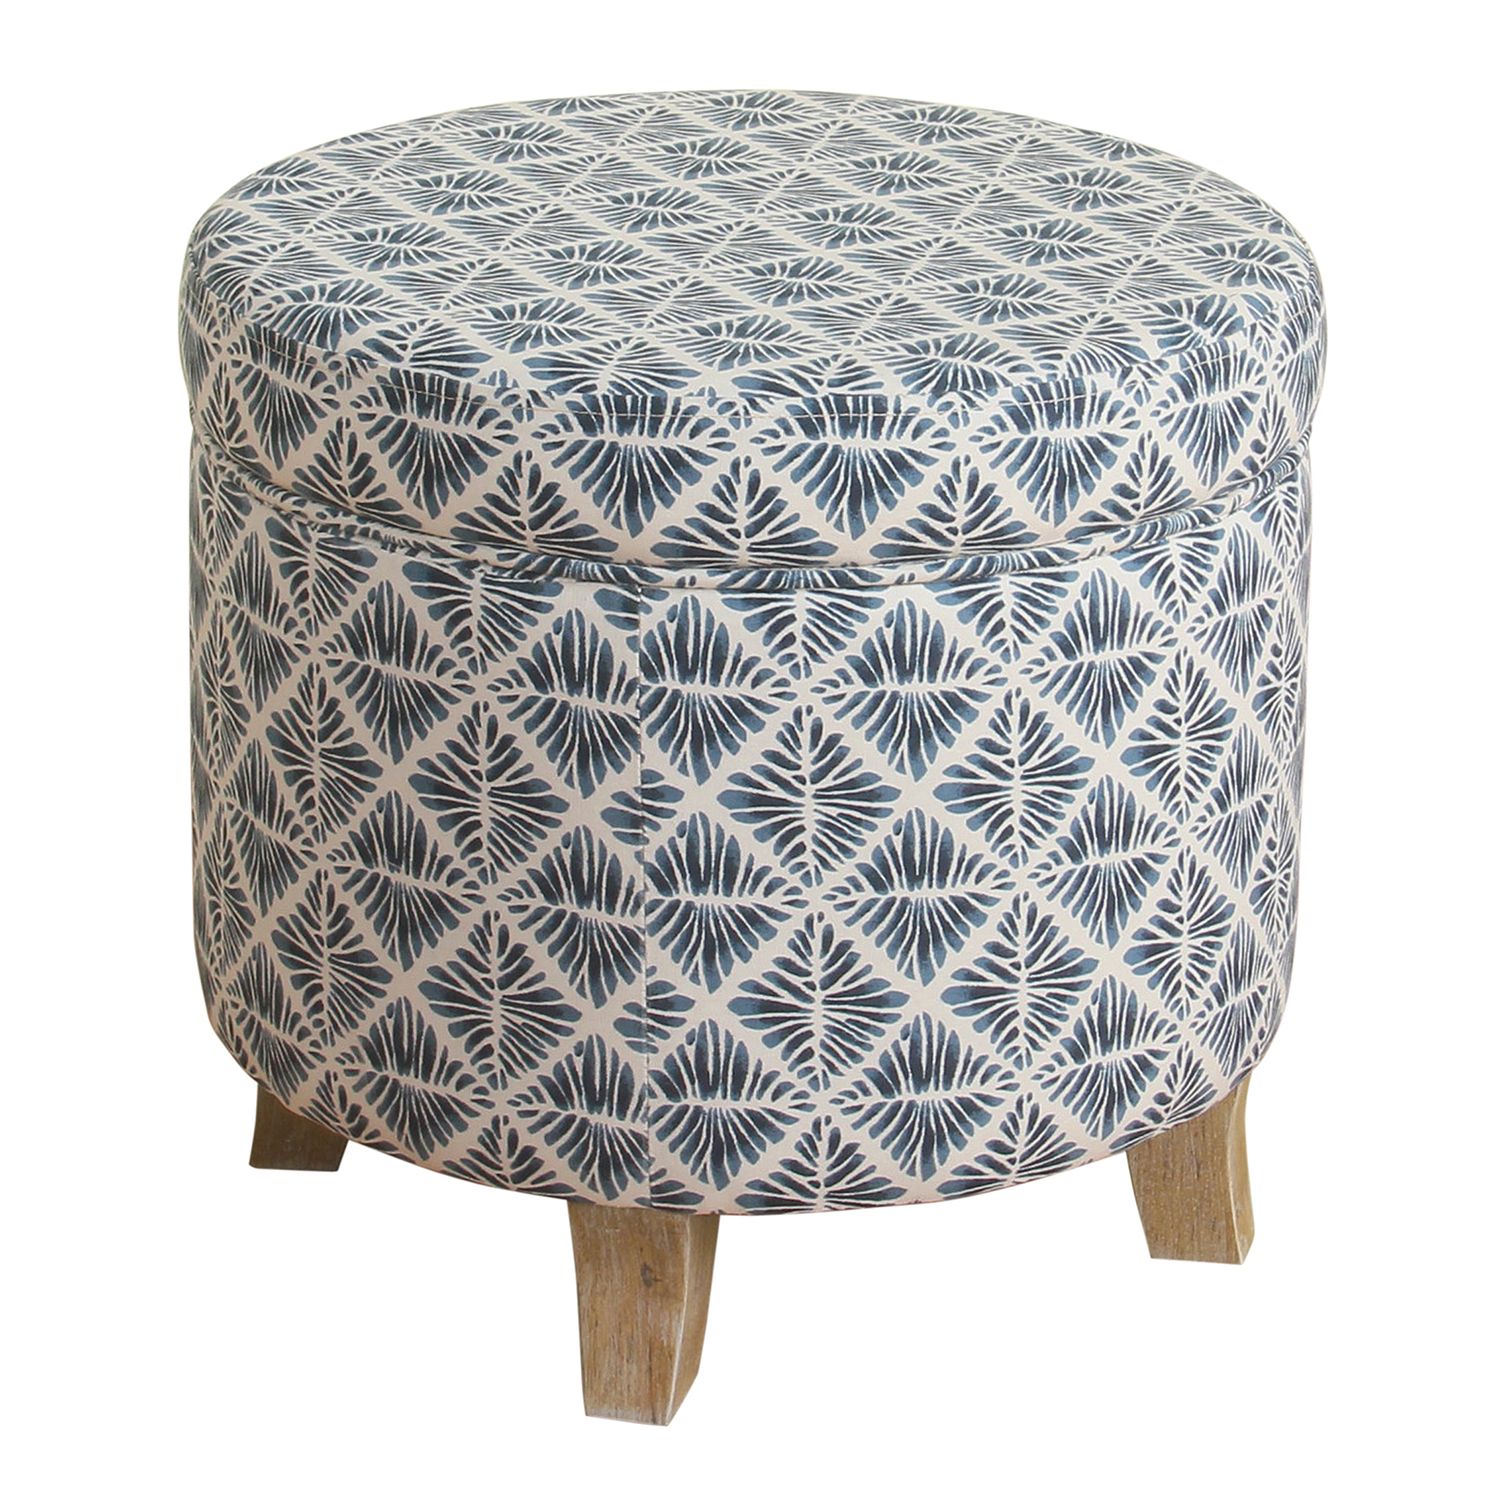 Image for HomePop Cole Classics Round Storage Ottoman at Kohl's.